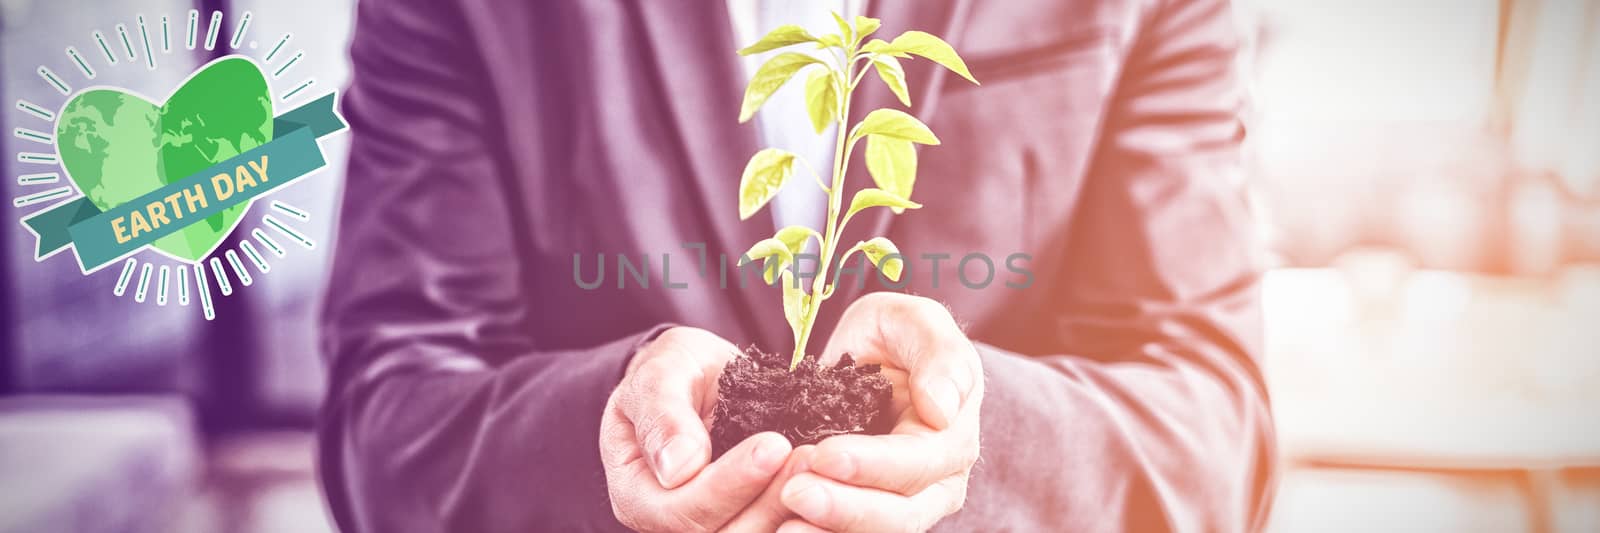 Earth Day Graphic against mid section of businessman holding plant